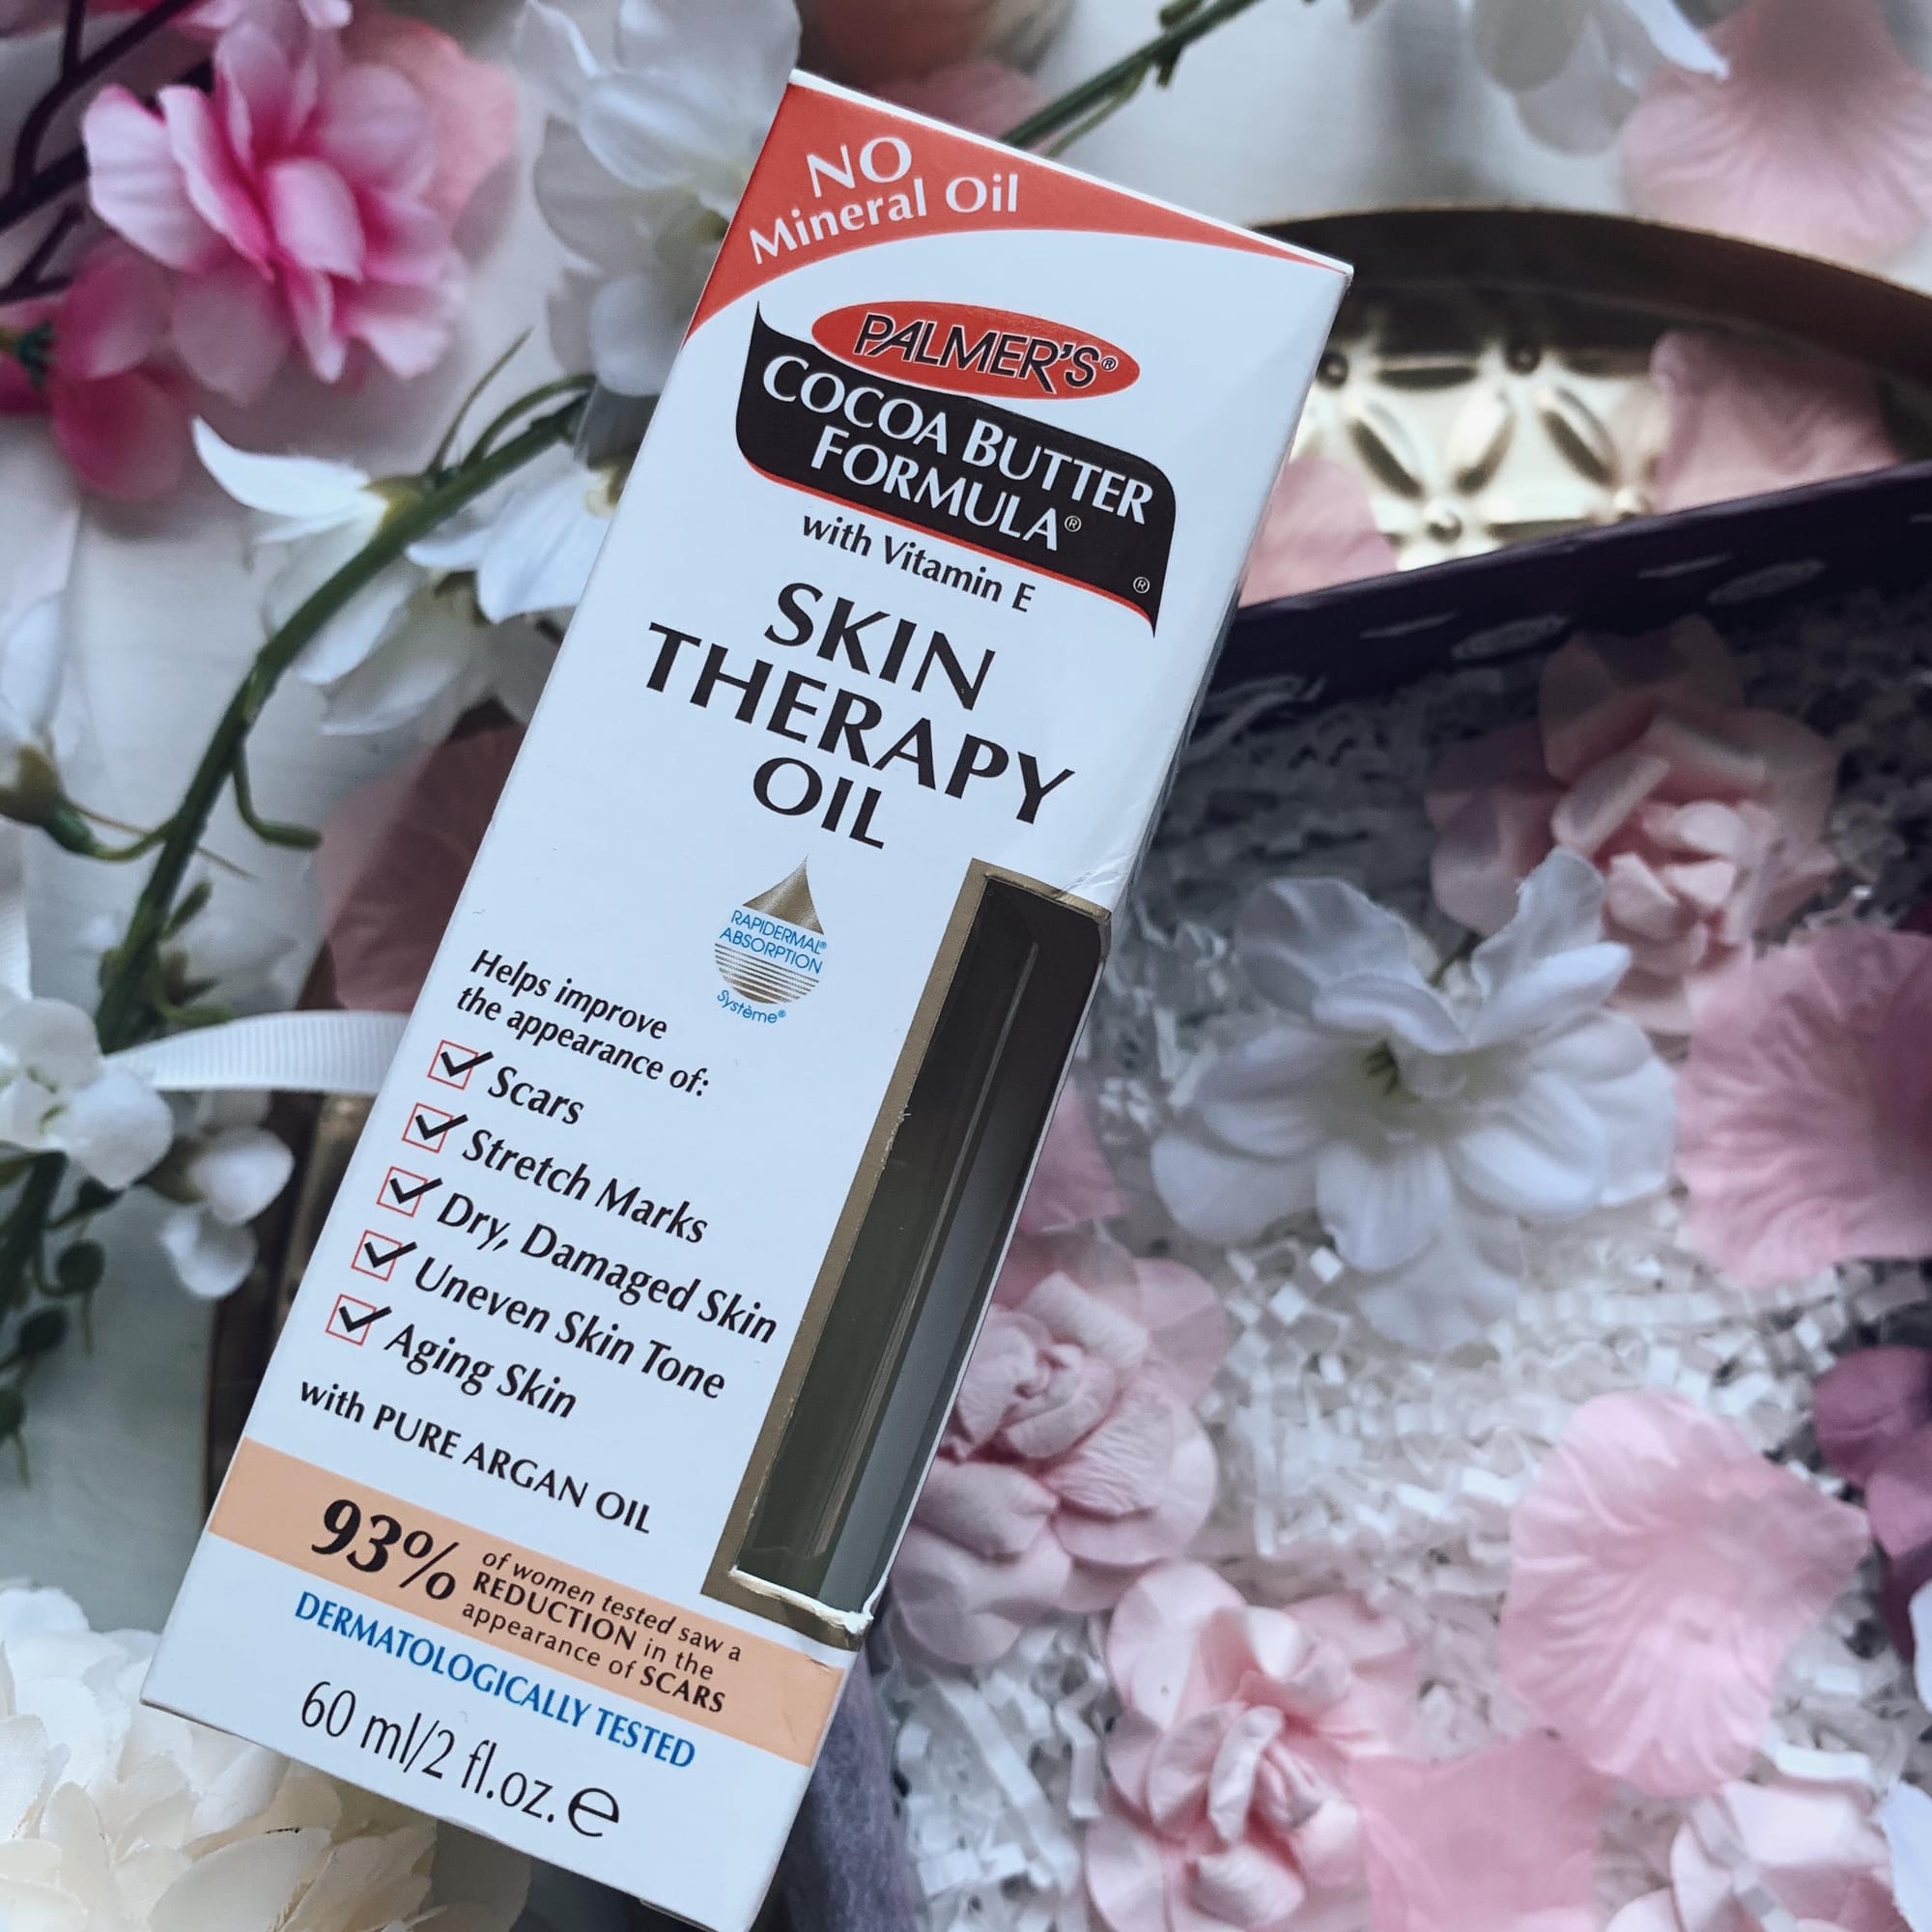 Palmers Cocoa Butter Formula Skin Therapy Oil - Only For You - Limited Edition Mother's Day Glossybox 2020 Review - Miss Boux